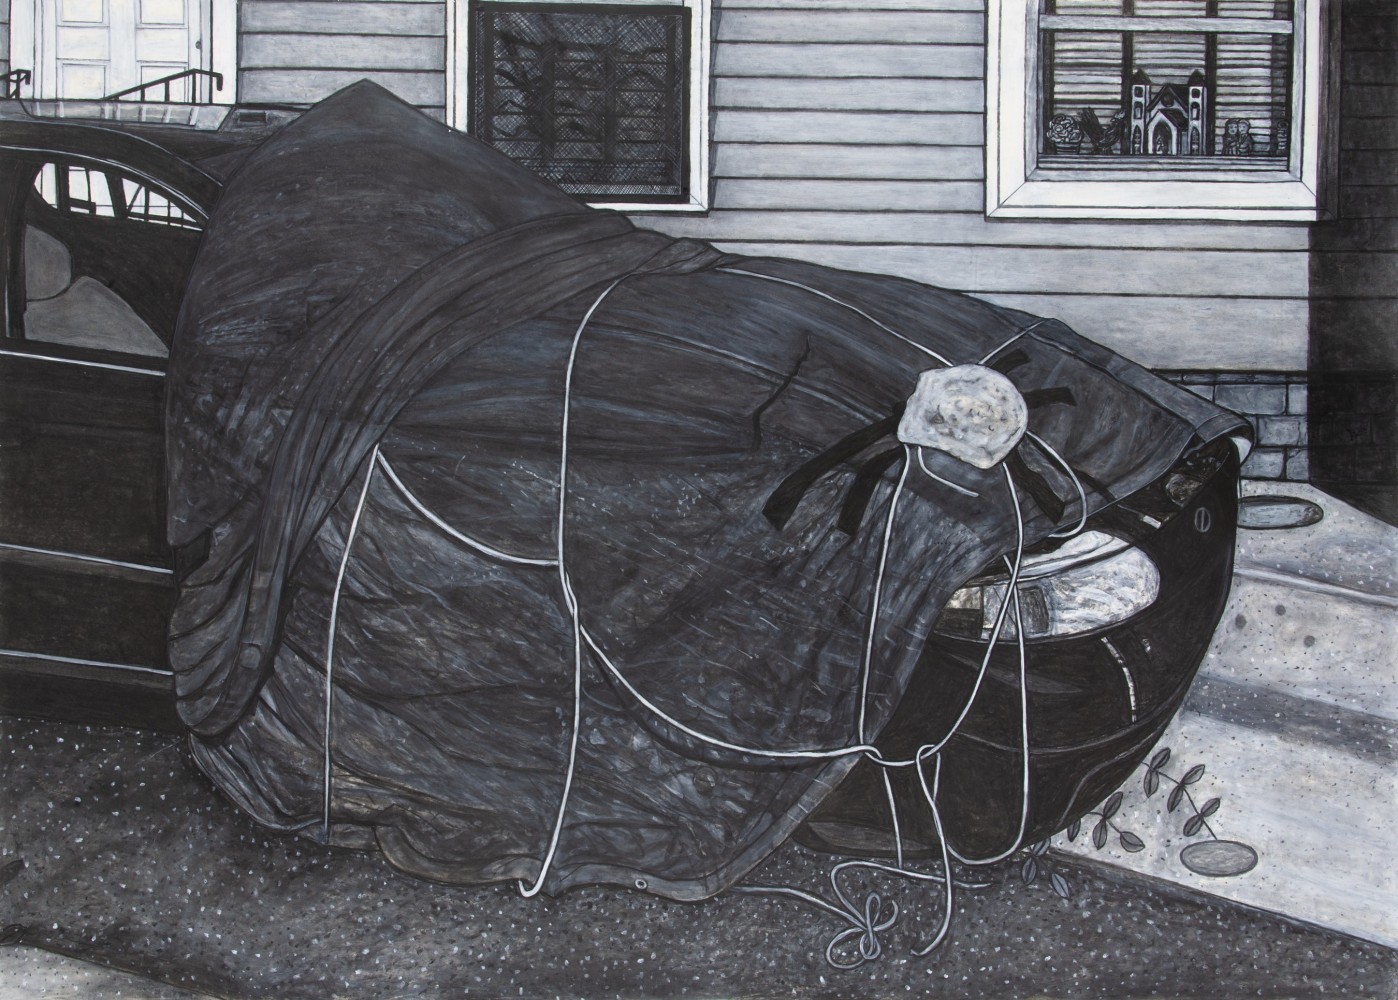 Willie Birch
An Altar for Villere Street, 2015
Acrylic and charcoal on paper
60 x 84 inches&amp;nbsp;